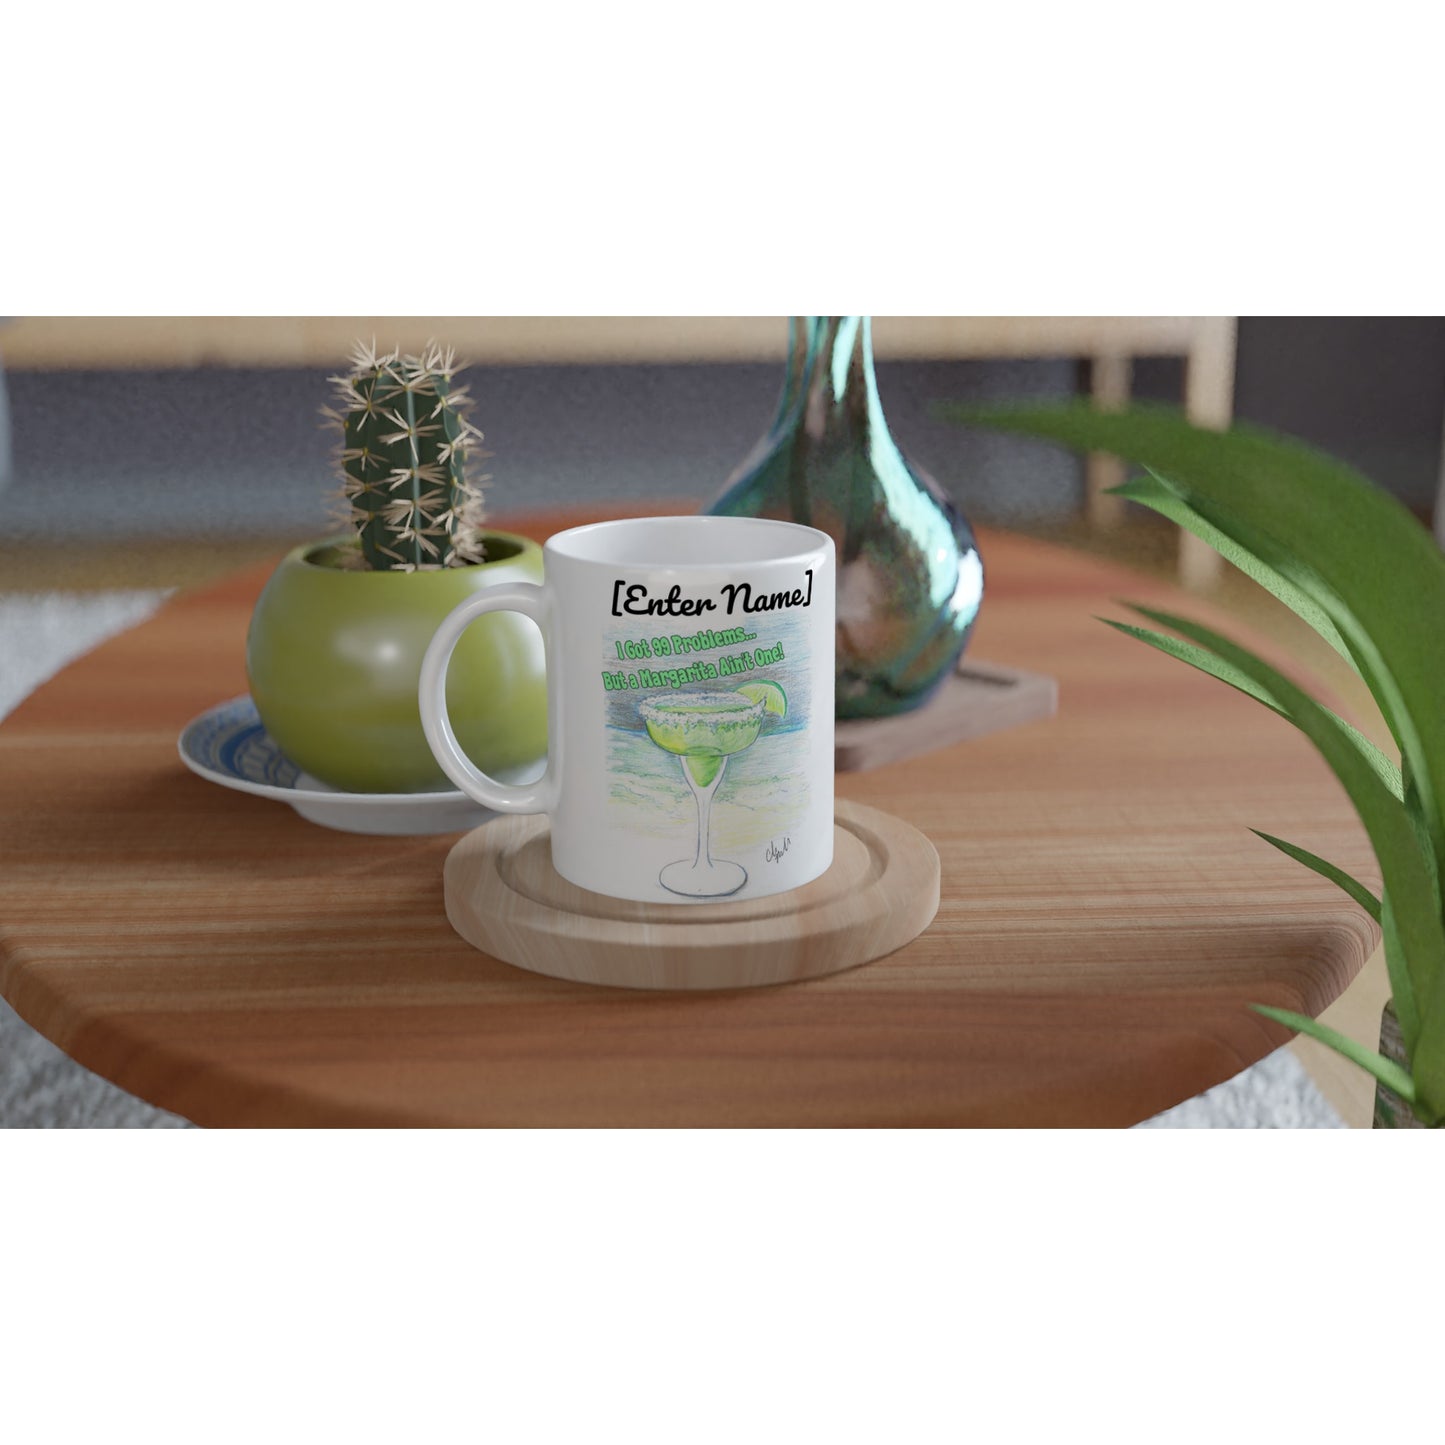 Personalized white ceramic 11oz mug with motto I Got 99 Problems But a Margarita Aint One coffee mug dishwasher and microwave safe from WhatYa Say Apparel sitting on coaster on coffee table with green potted cactus and silver vase.